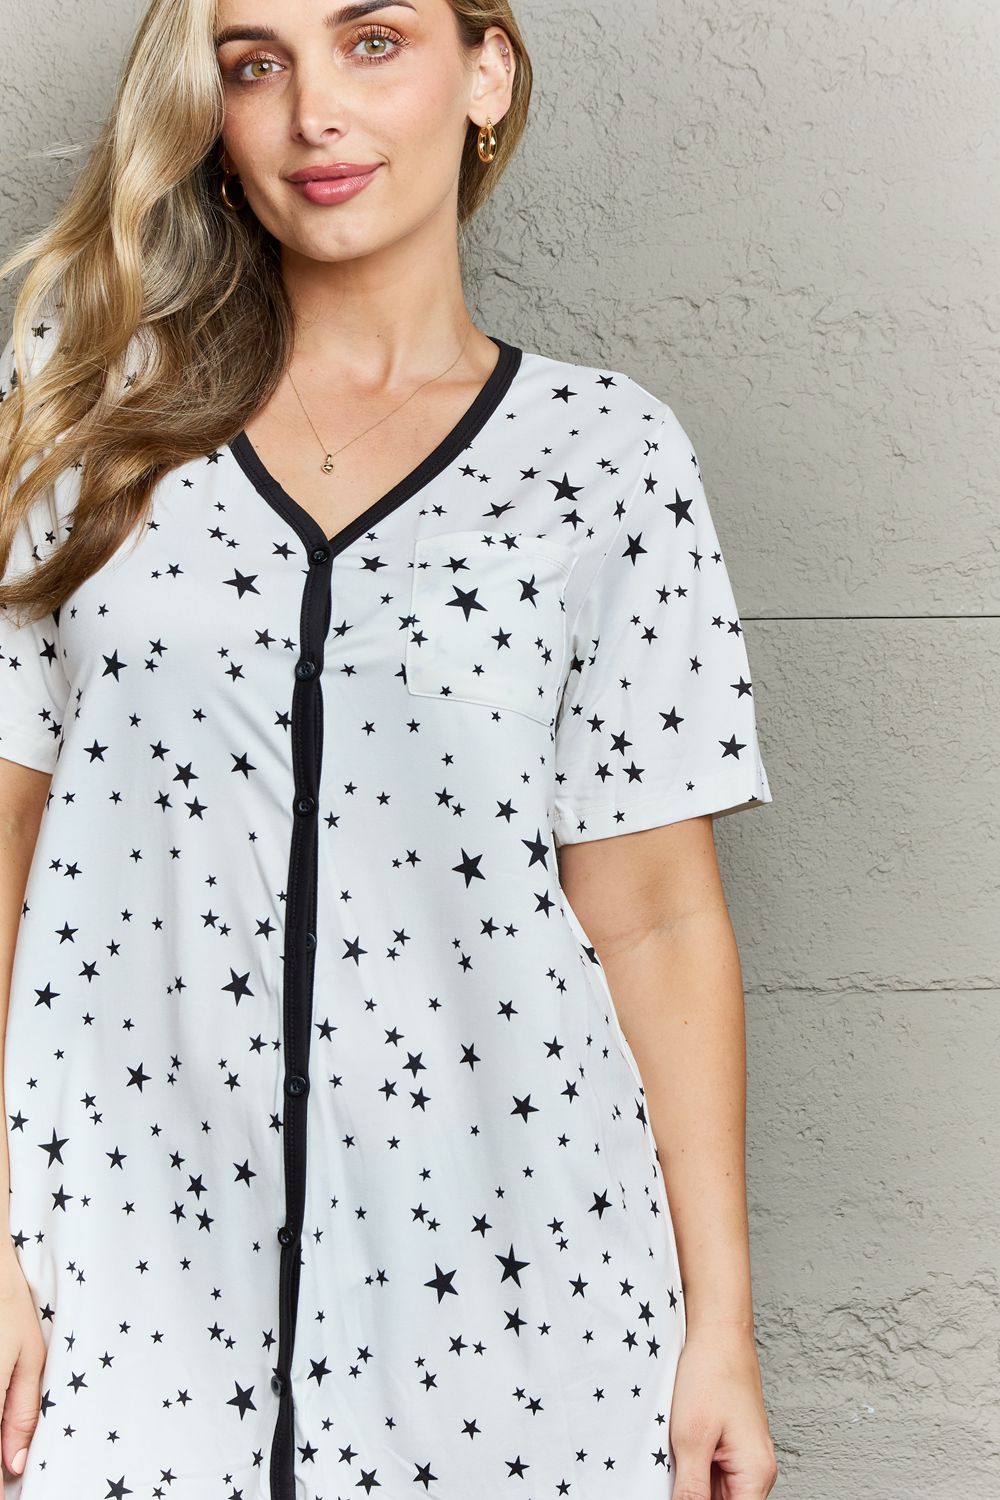 Women’s MOON NITE Quilted Quivers Button Down Sleepwear Dress